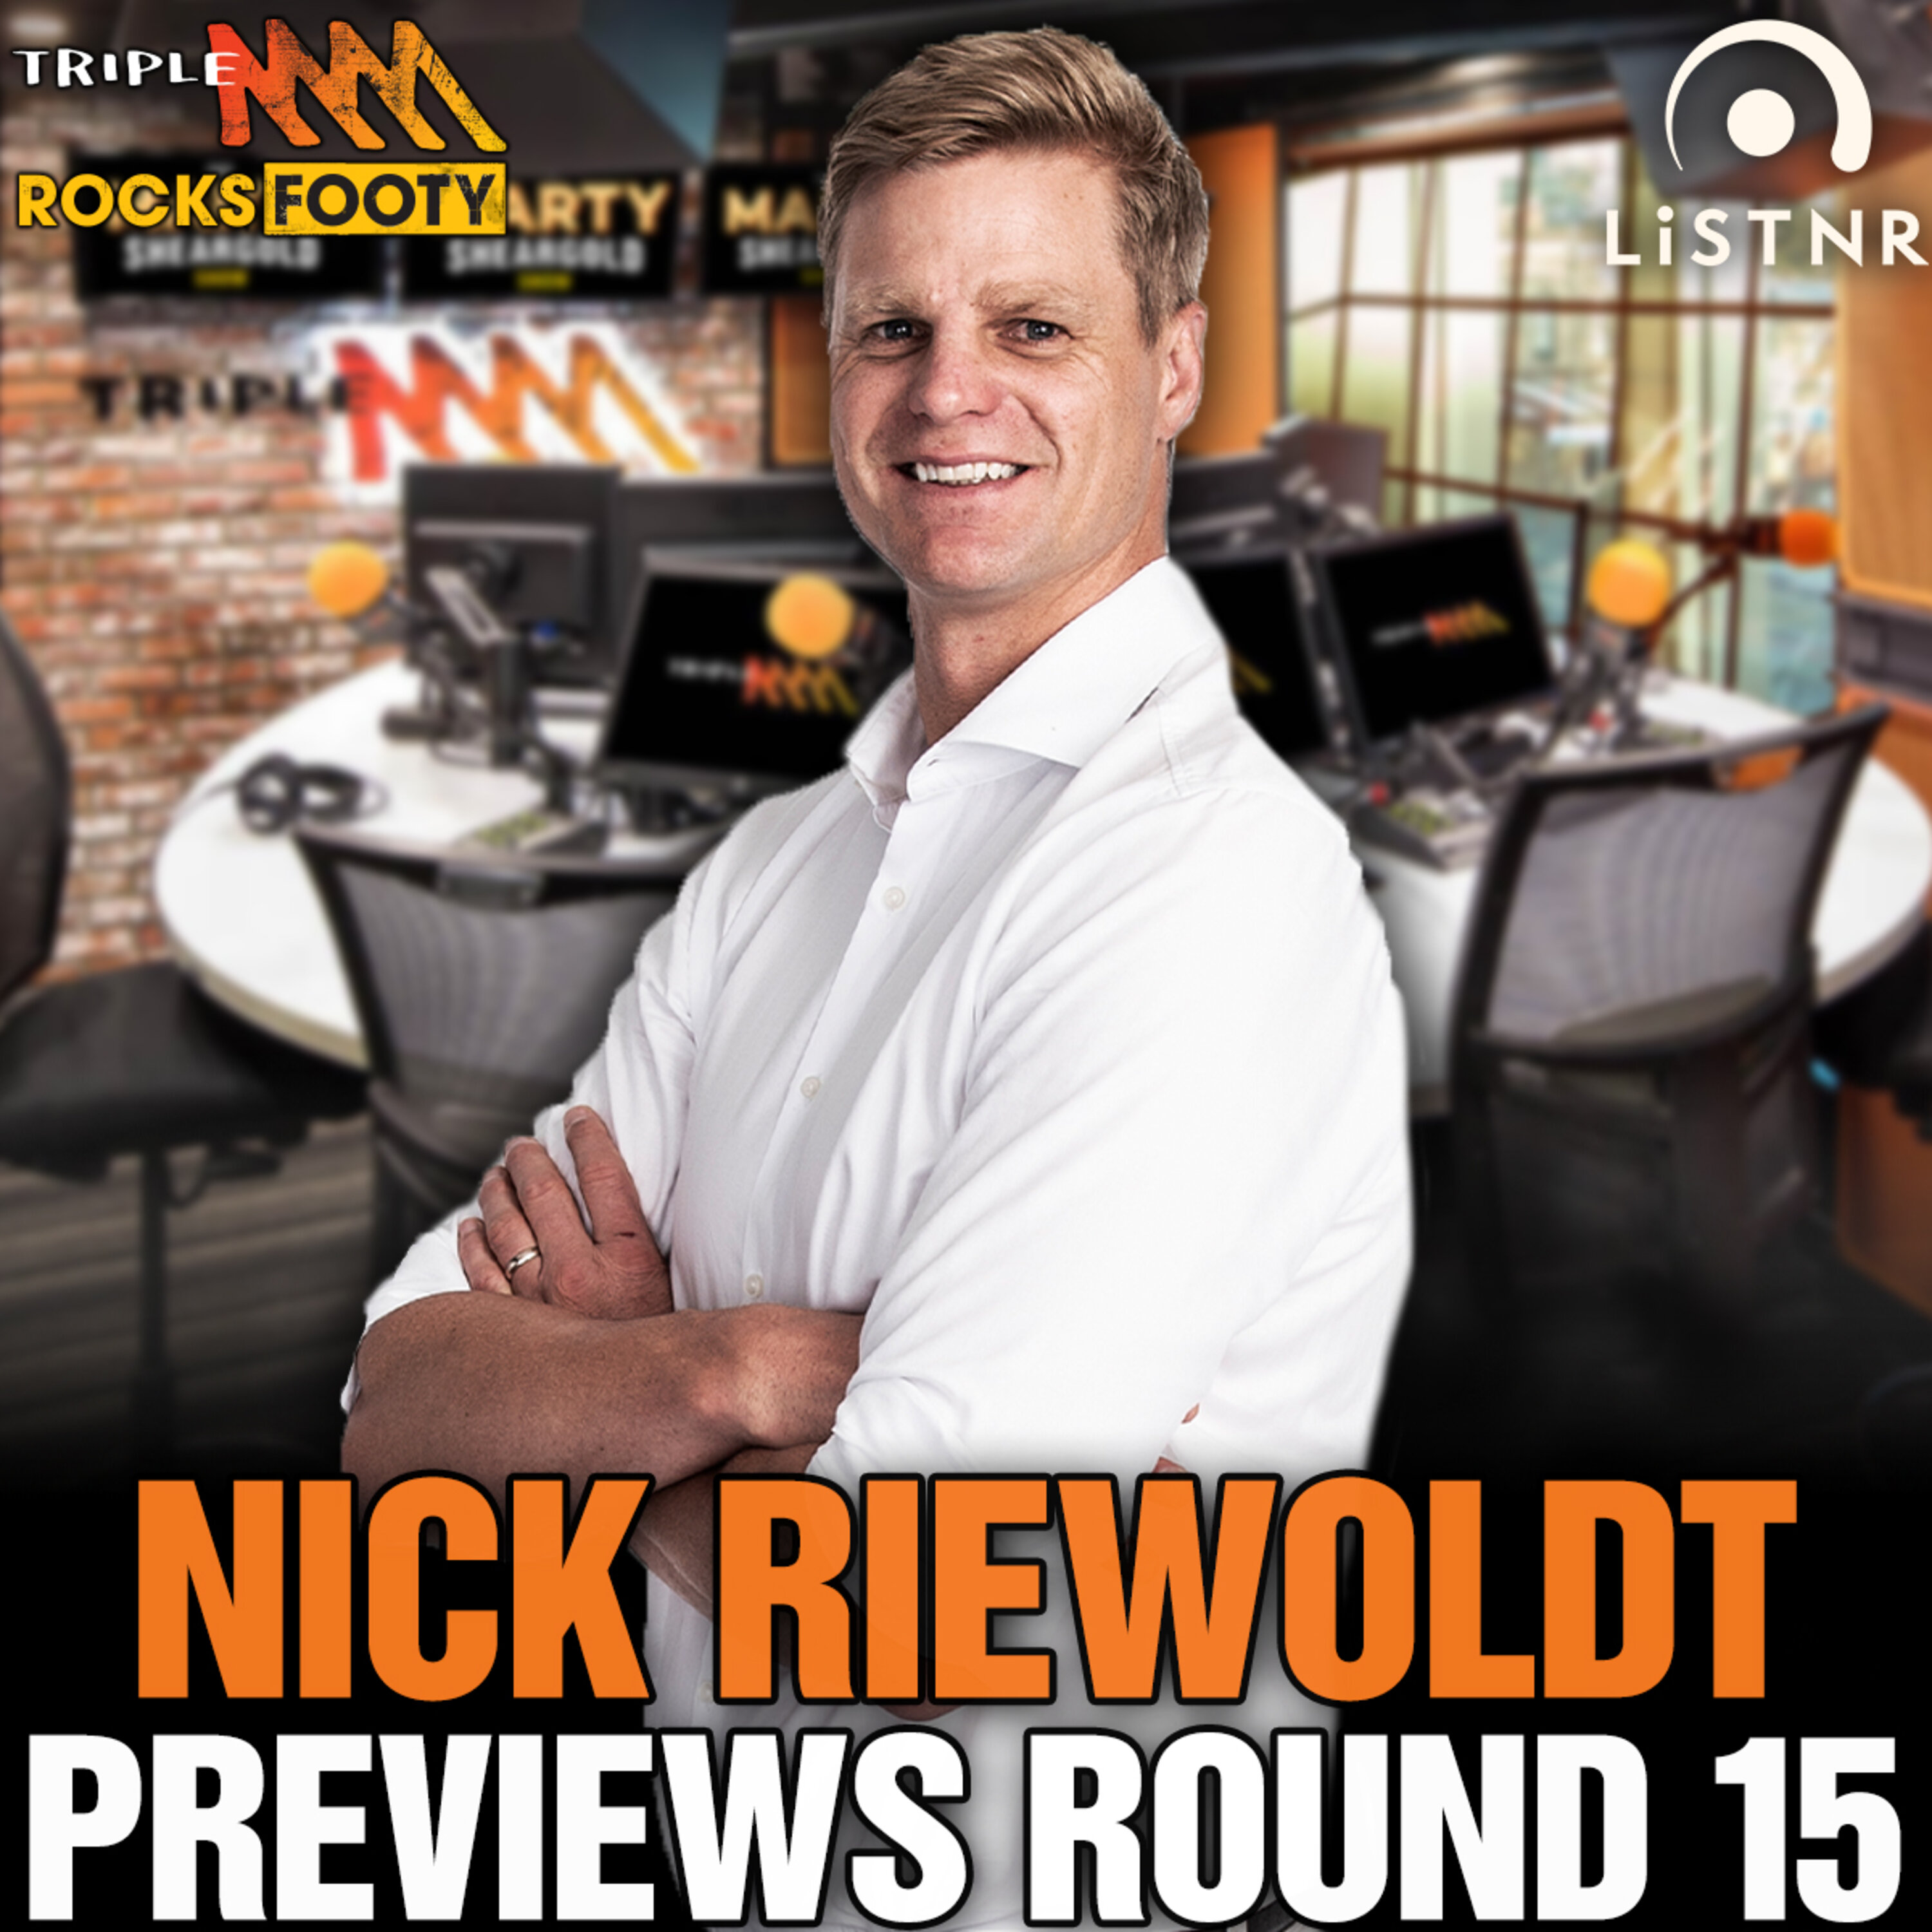 Nick Riewoldt on joining the Sunday Rub this week, Richmond getting back to their flag best, and a massive round 15 preview